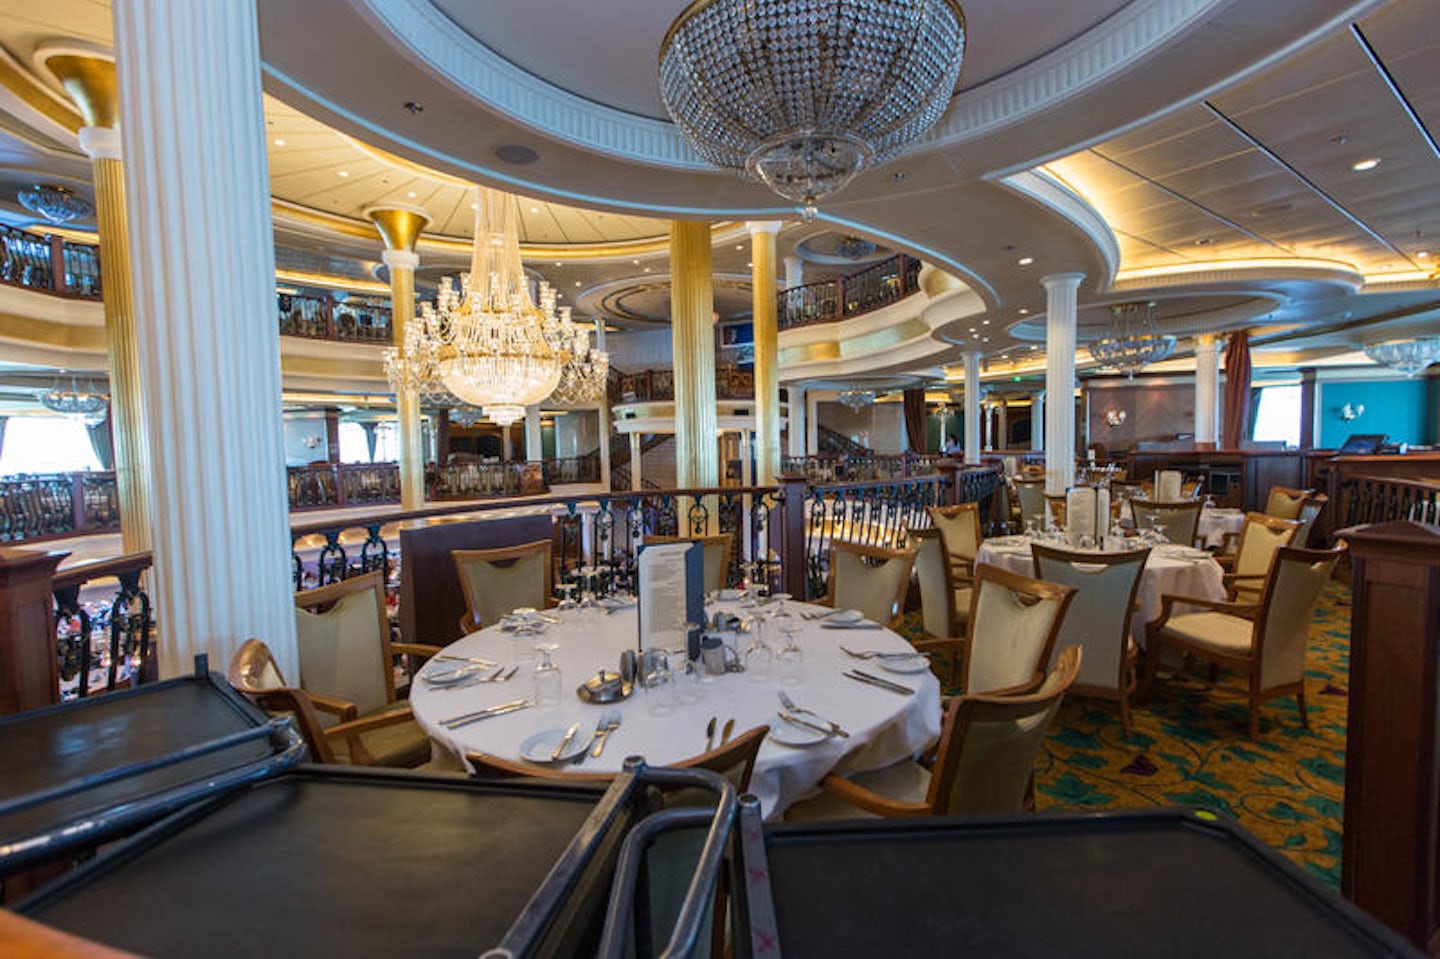 Main Dining Room on Liberty of the Seas